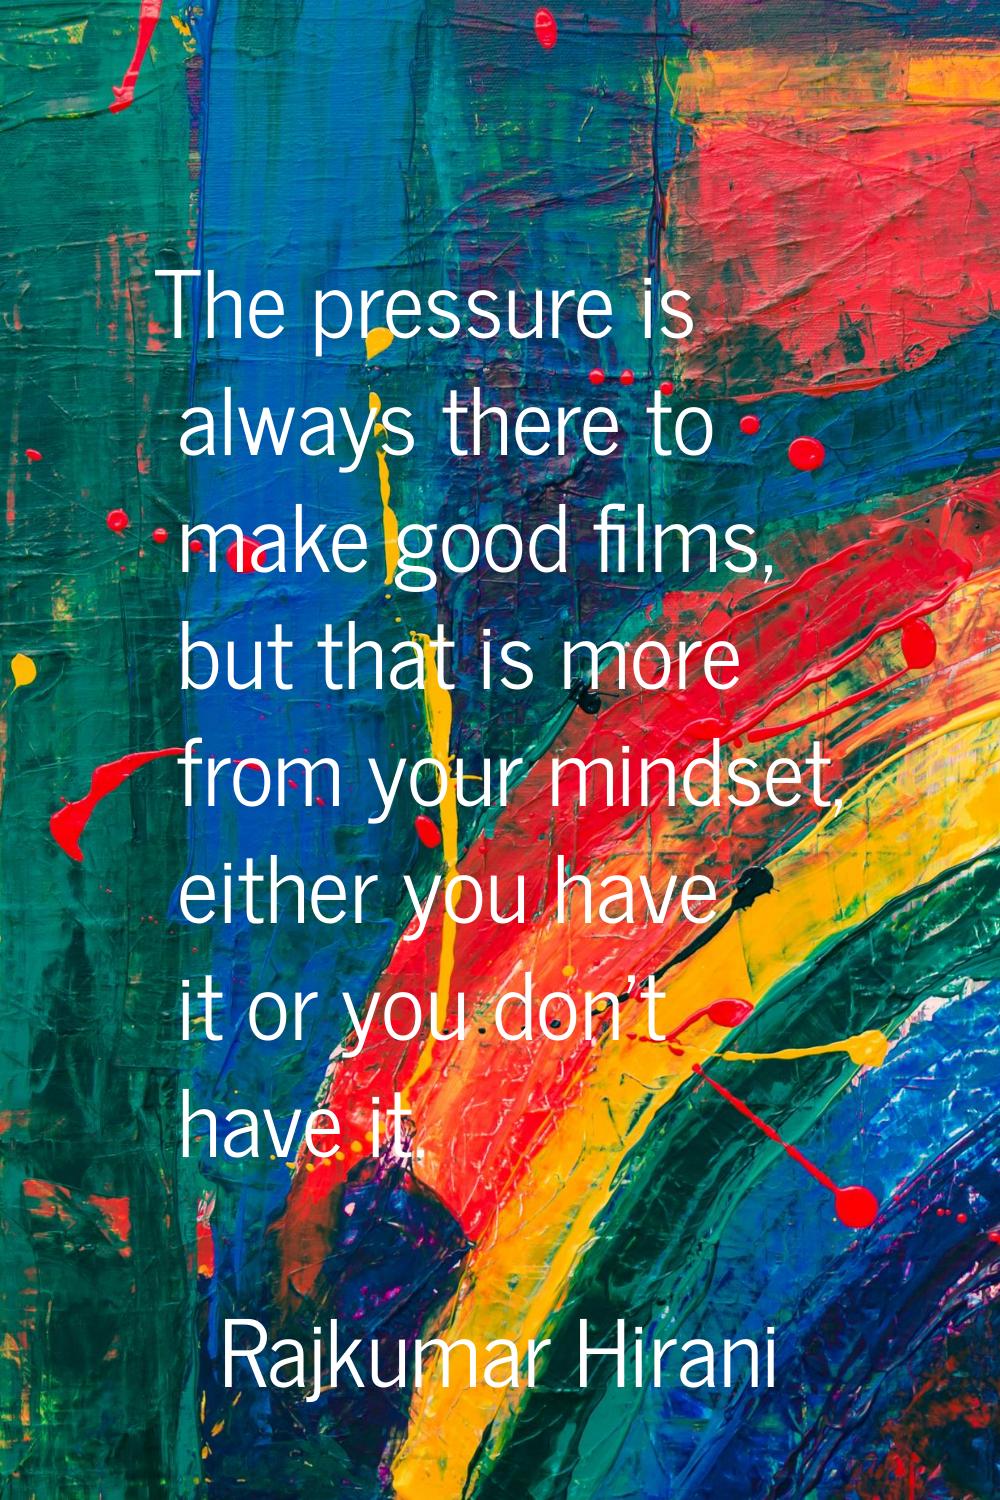 The pressure is always there to make good films, but that is more from your mindset, either you hav